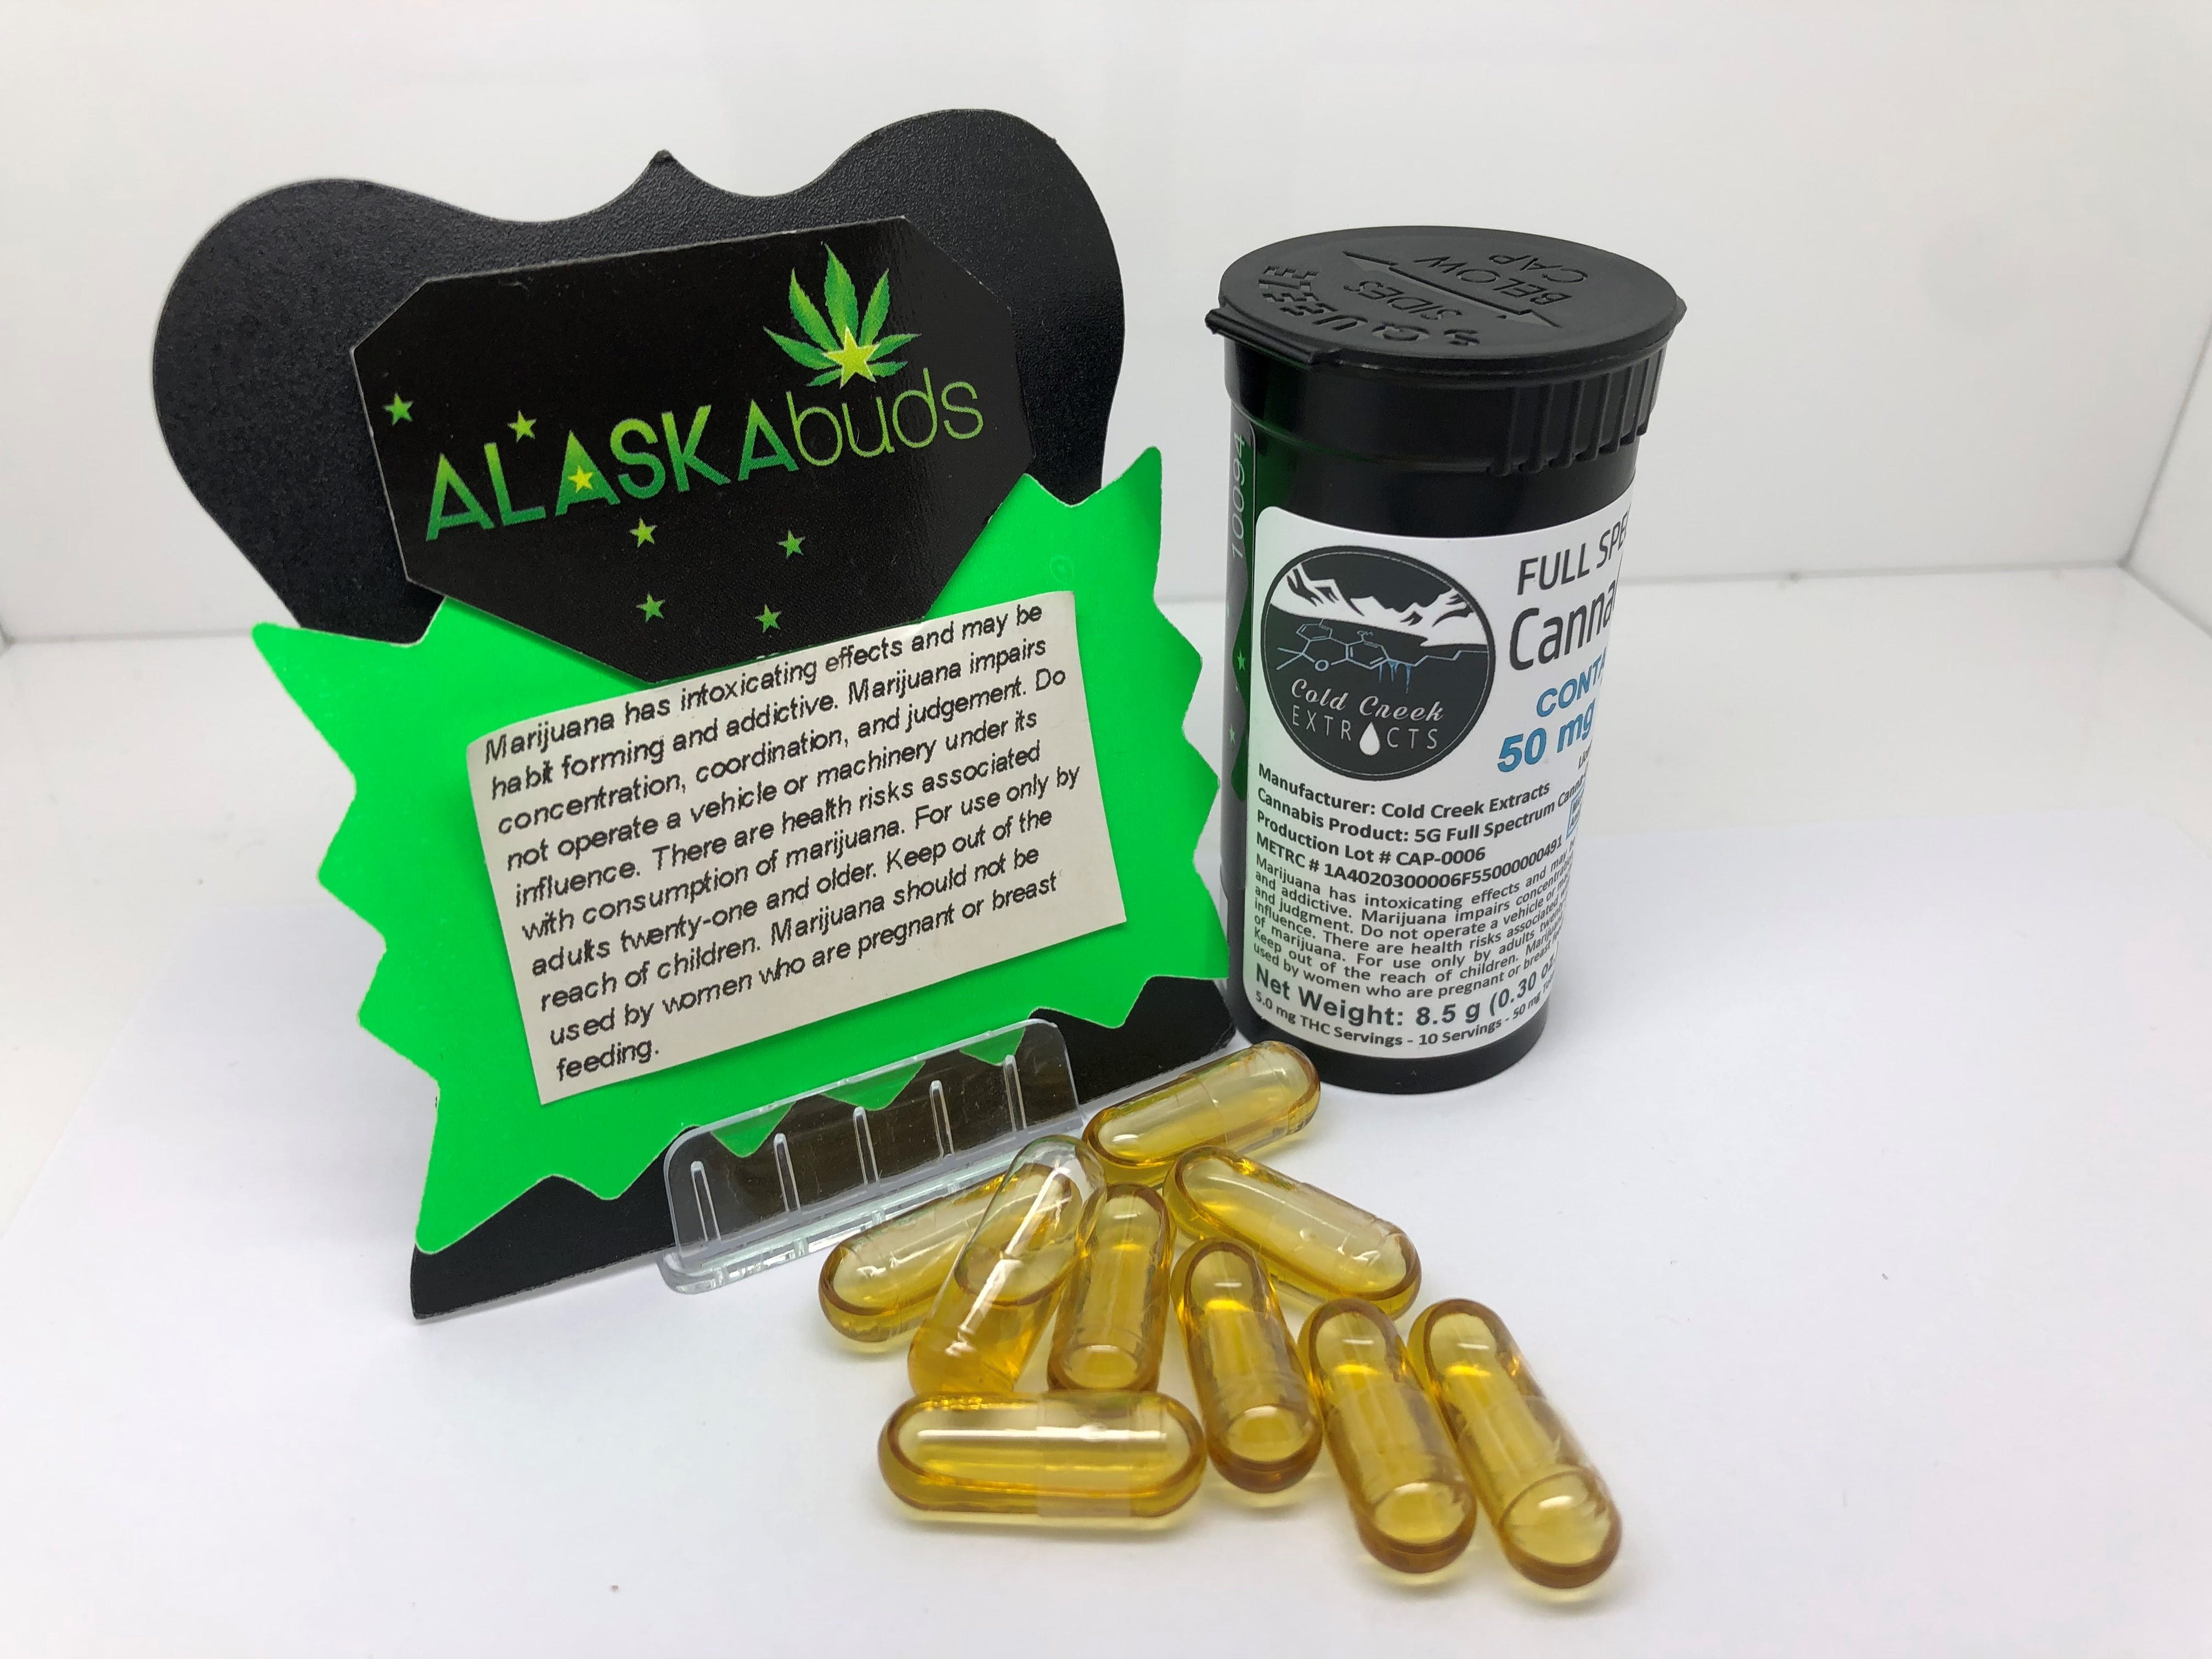 marijuana-dispensaries-1005-e-5th-ave-anchorage-5g-cannacaps-50mg-thc-total-from-cold-creek-extracts